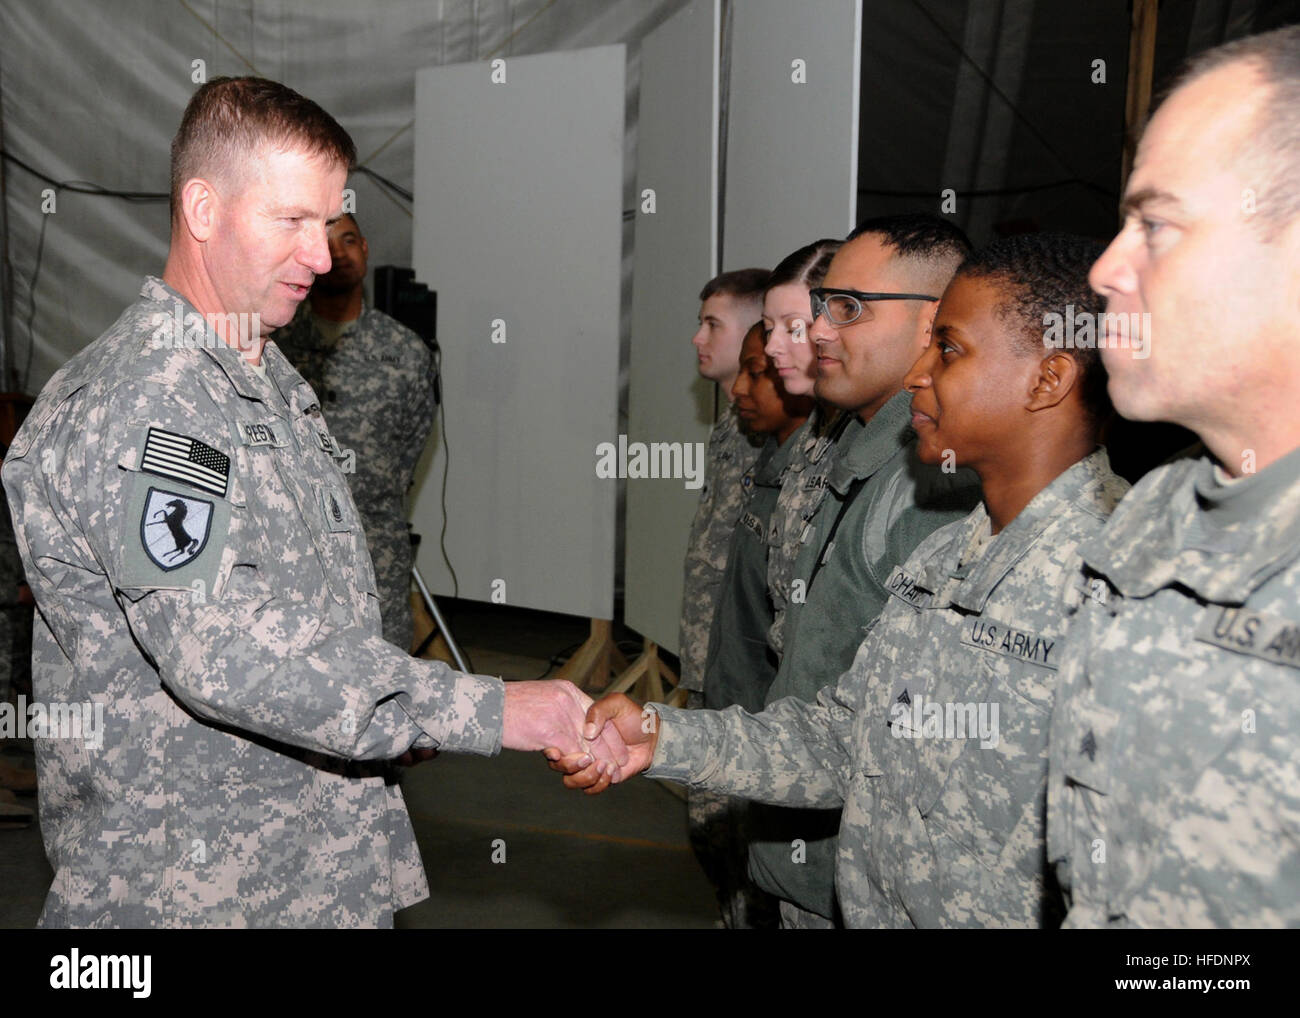 091207-N-9247P-017 - CAMP EGGERS, Afghanistan – Sergeant Major of the Army Kenneth Preston shakes hands with Soldiers of NATO Training Mission – Afghanistan at Camp Eggers Dec. 7, 2009. During his visit, Preston responded to the Soldiers questions and concerns, presented ceremonial coins, and thanked them for their service. (U.S. Navy photo by Mass Communication Specialist 3rd Class Kirk Putnam/RELEASED) 091207-N-9247P-017 (4167004864) Stock Photo